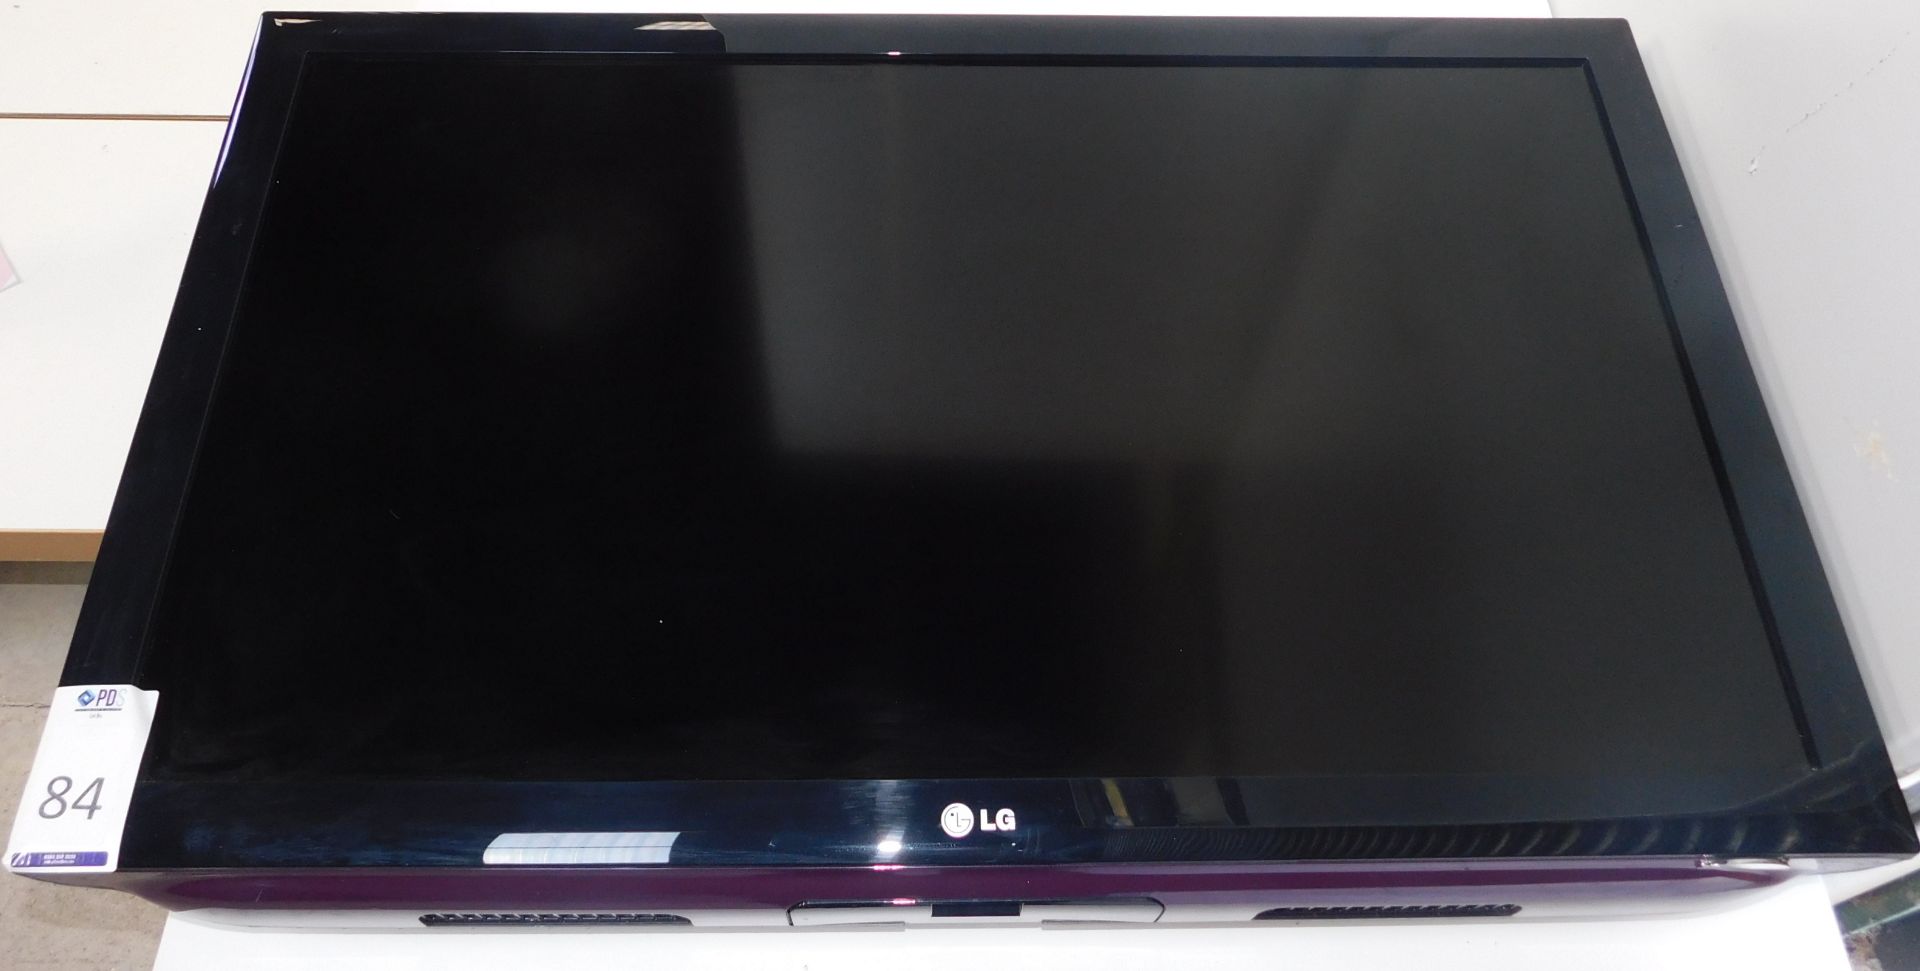 LG 42LD490 TV, s/n; 103WRYU7A906 (Located Brentwood, See General Notes for More Details)